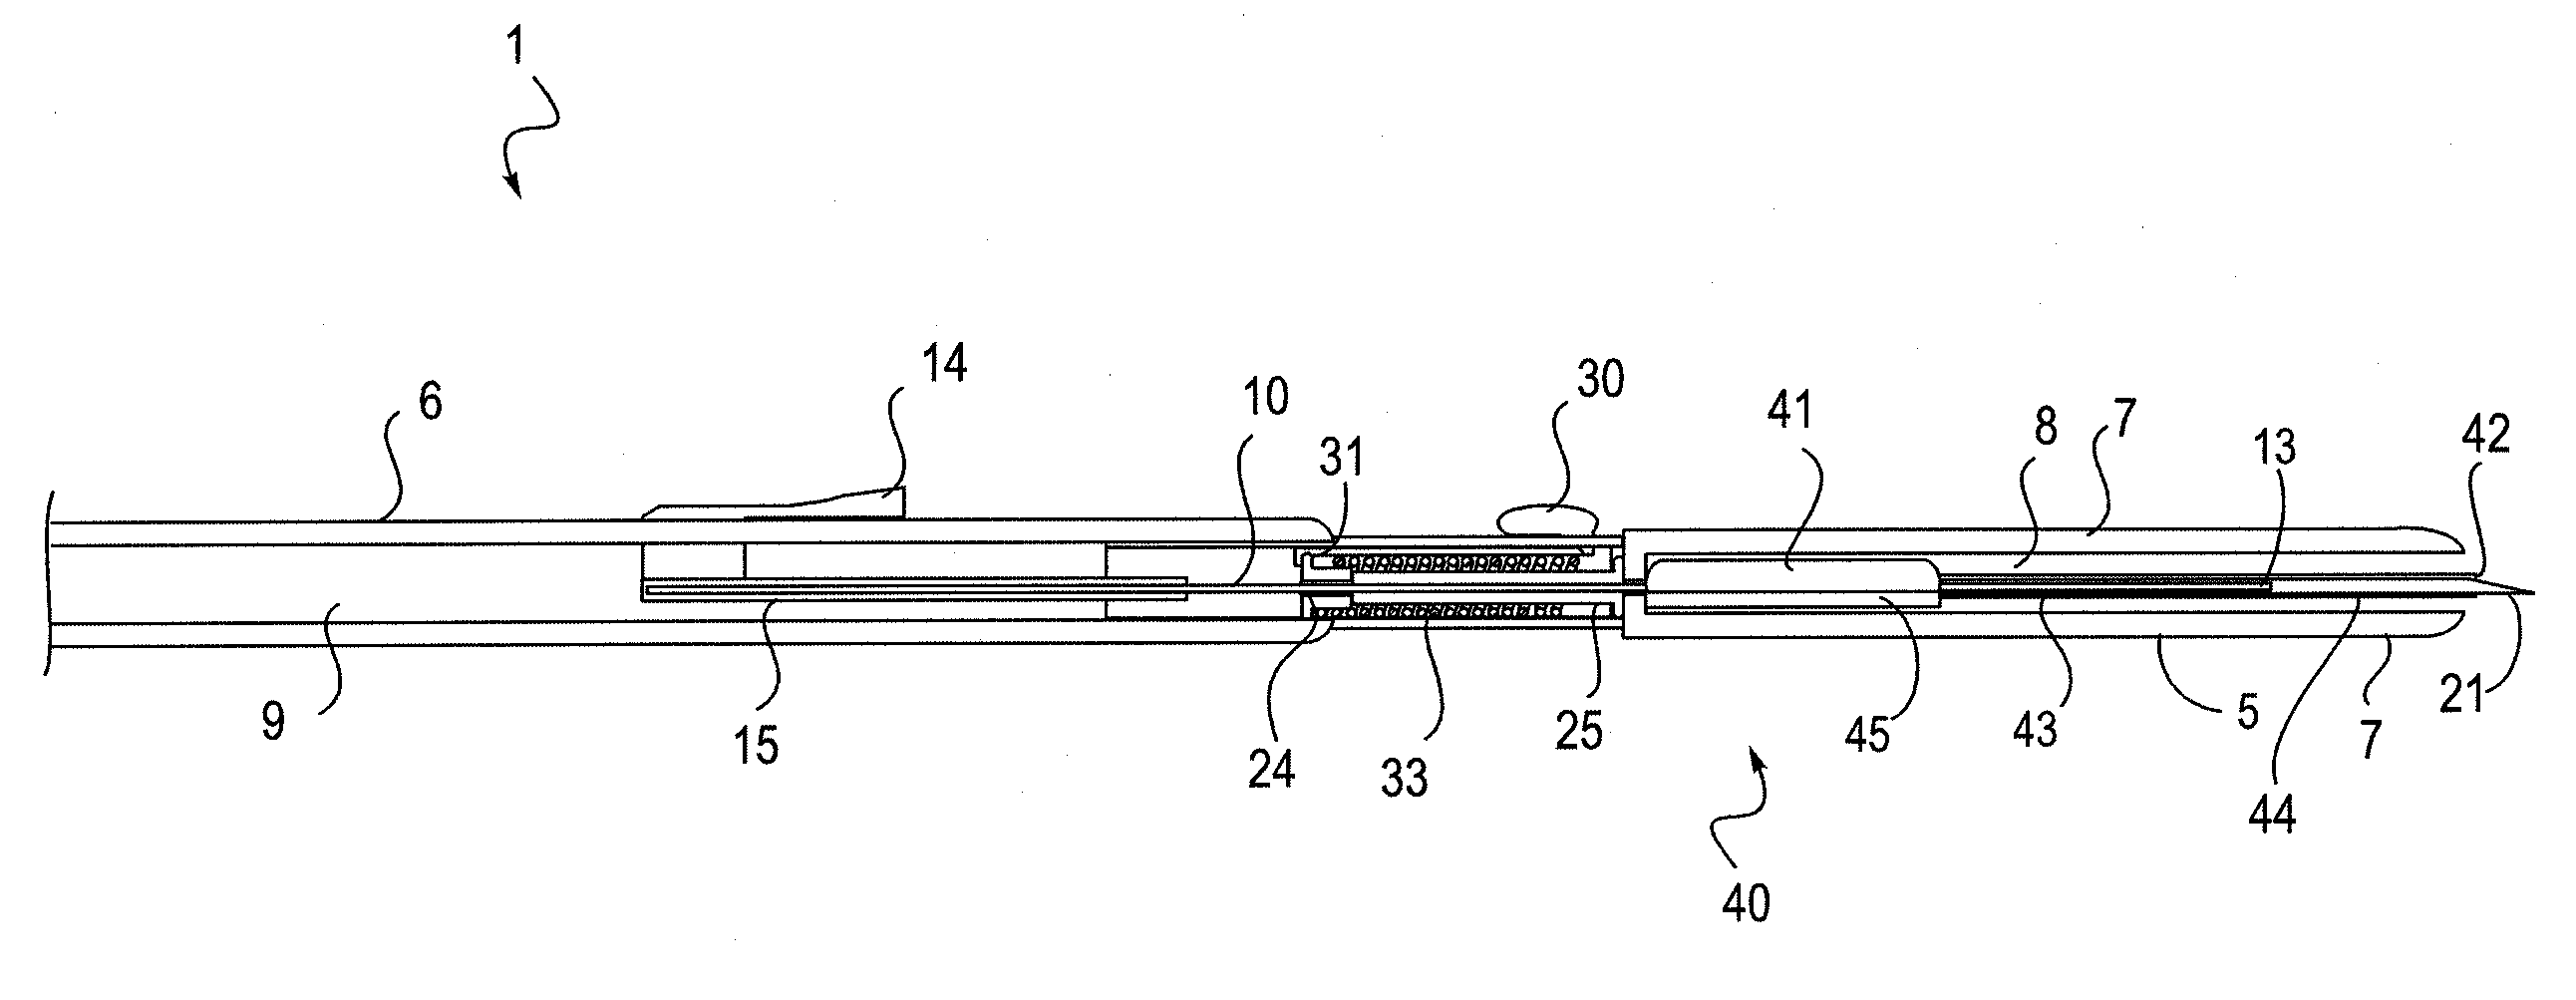 Intravenous catheter insertion and blood sample devices and method of use